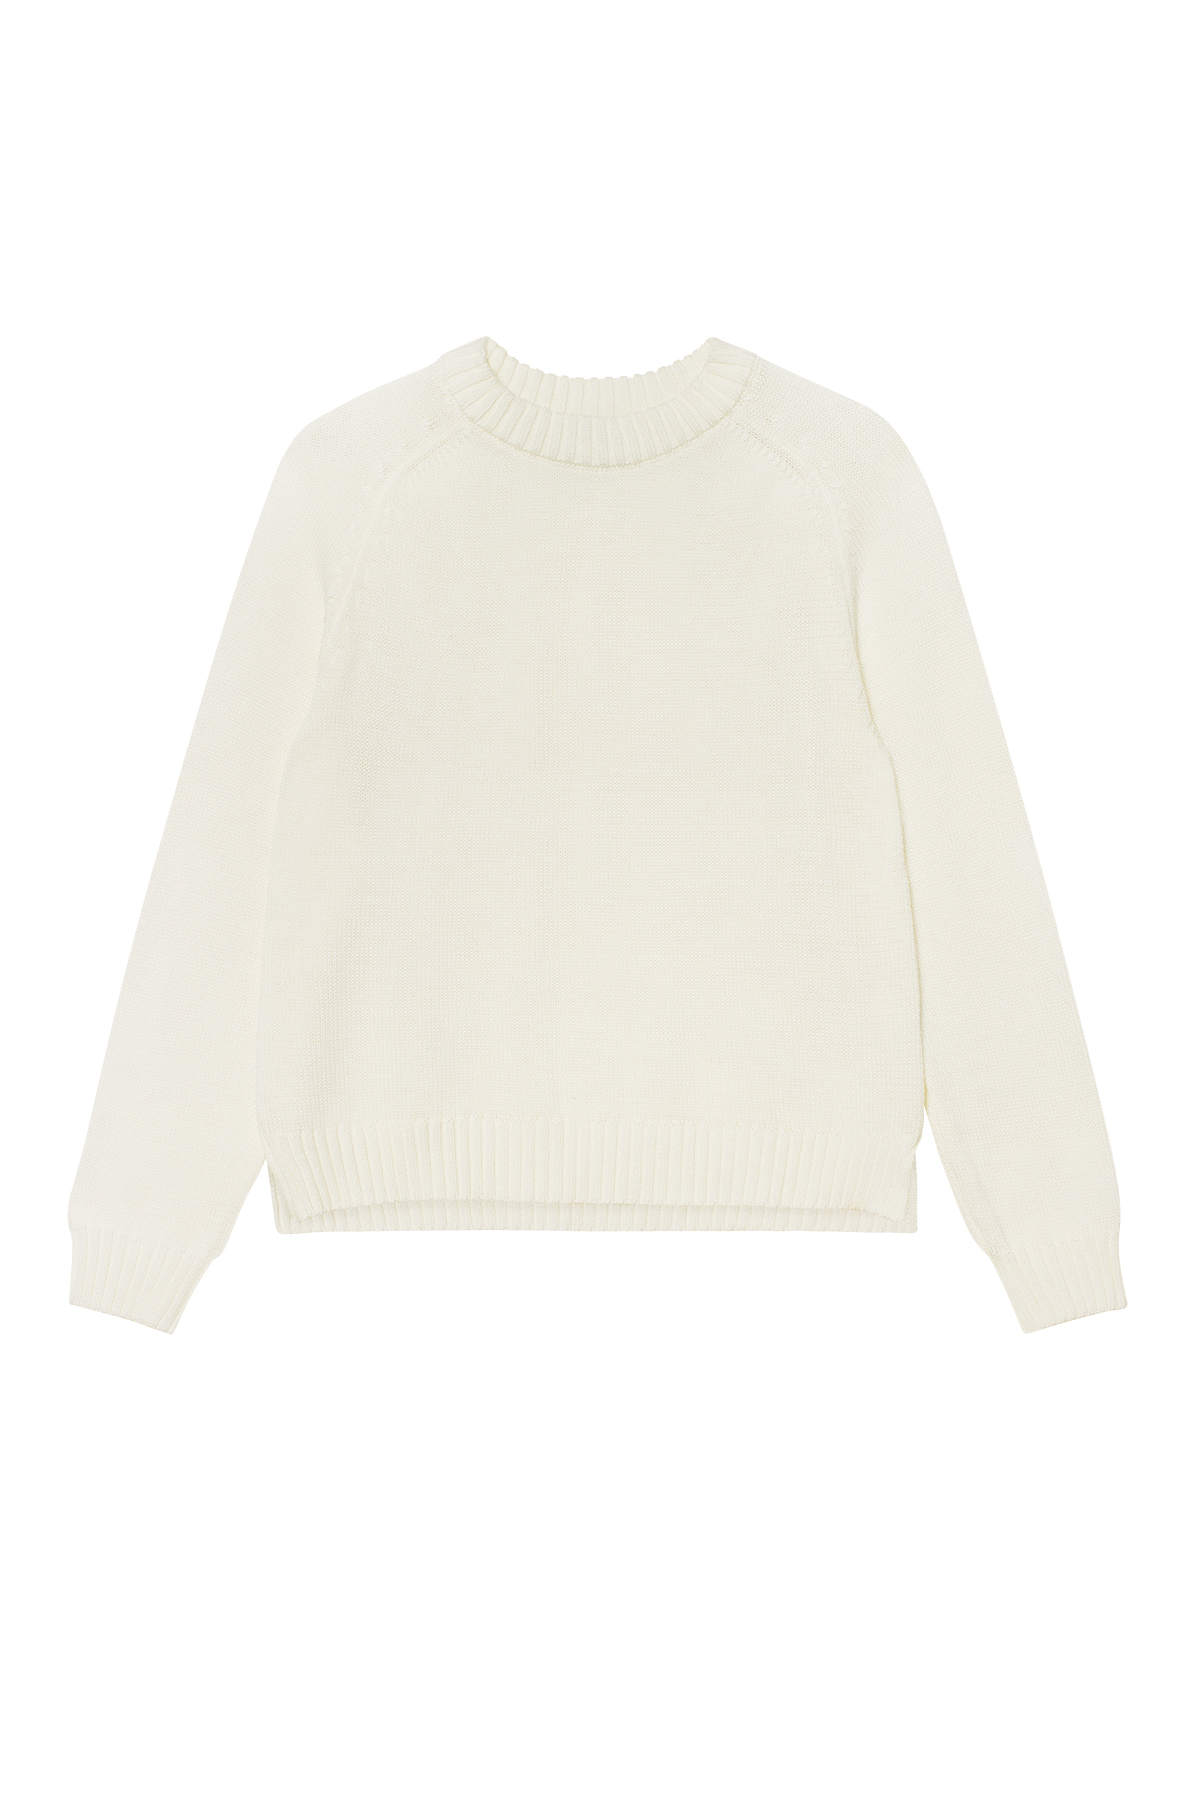 Milky basic knitted sweater with cotton, photo 6